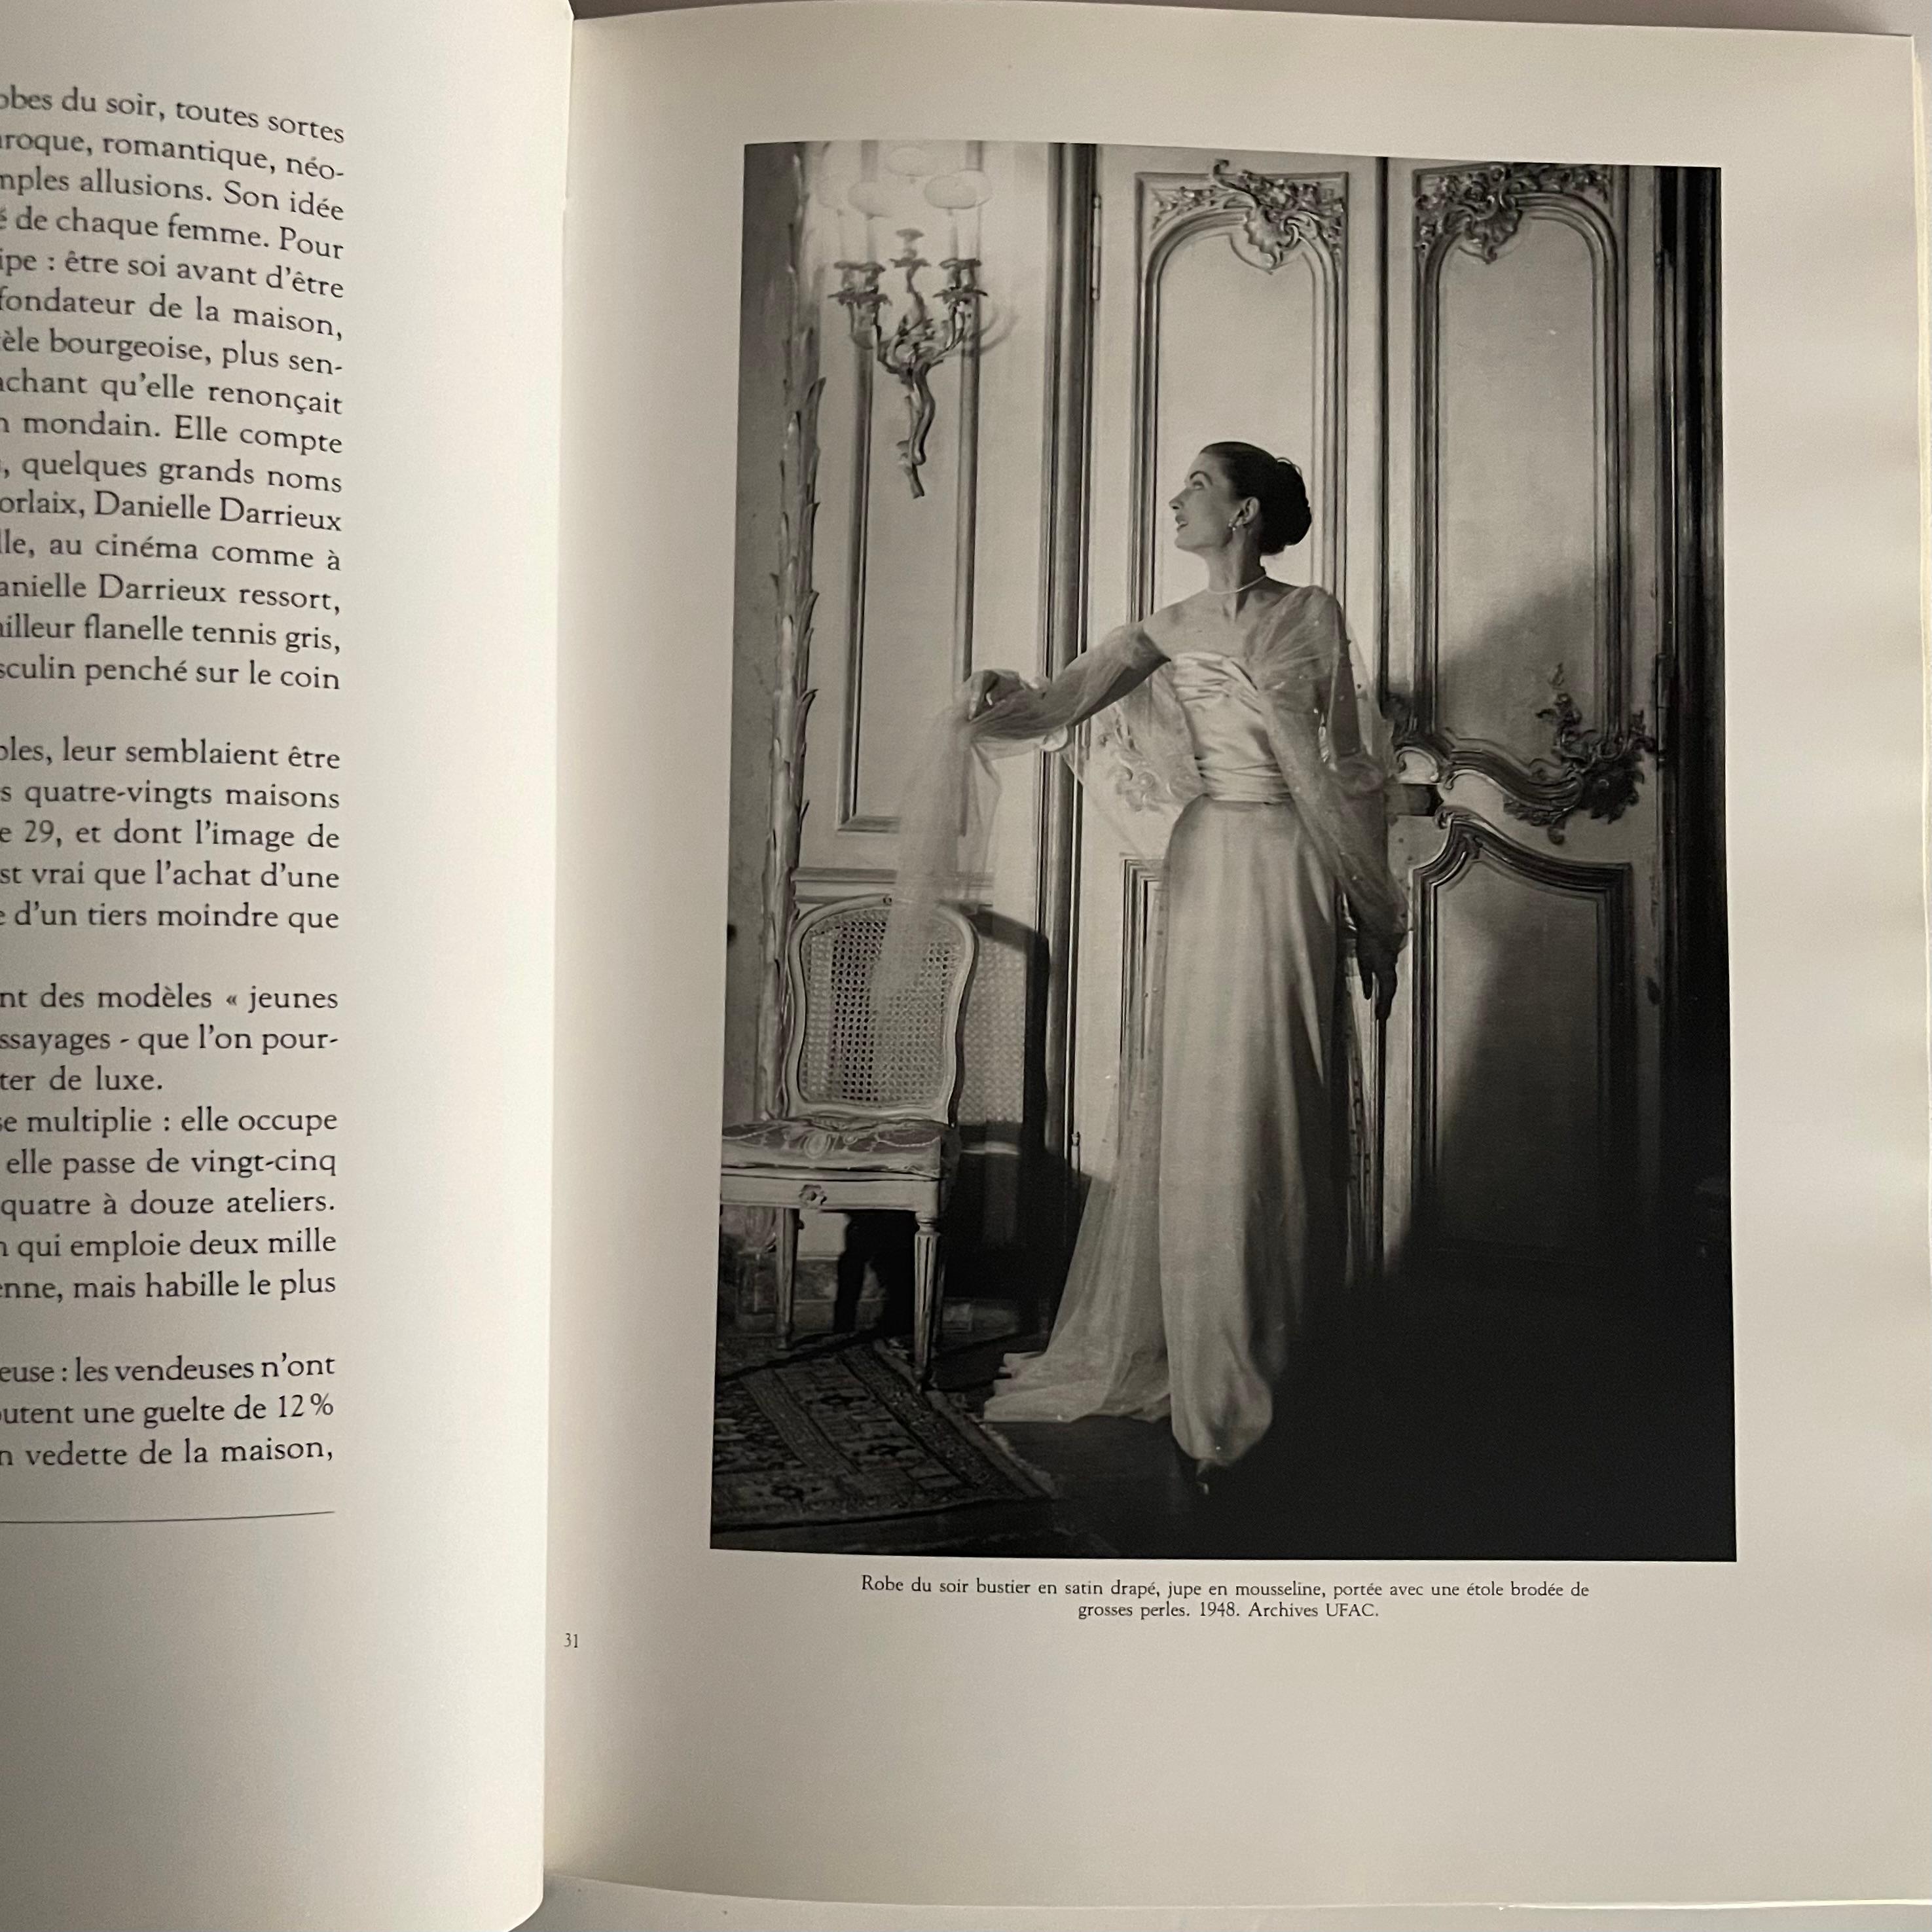 Published by Edition du Regard, 1st edition, Paris, 1992. Hardback with French text.

An abundantly illustrated tome expanding on the adventures Nina Ricci has taken. From haute couturier for beautiful customised gowns to the graceful perfume bottle